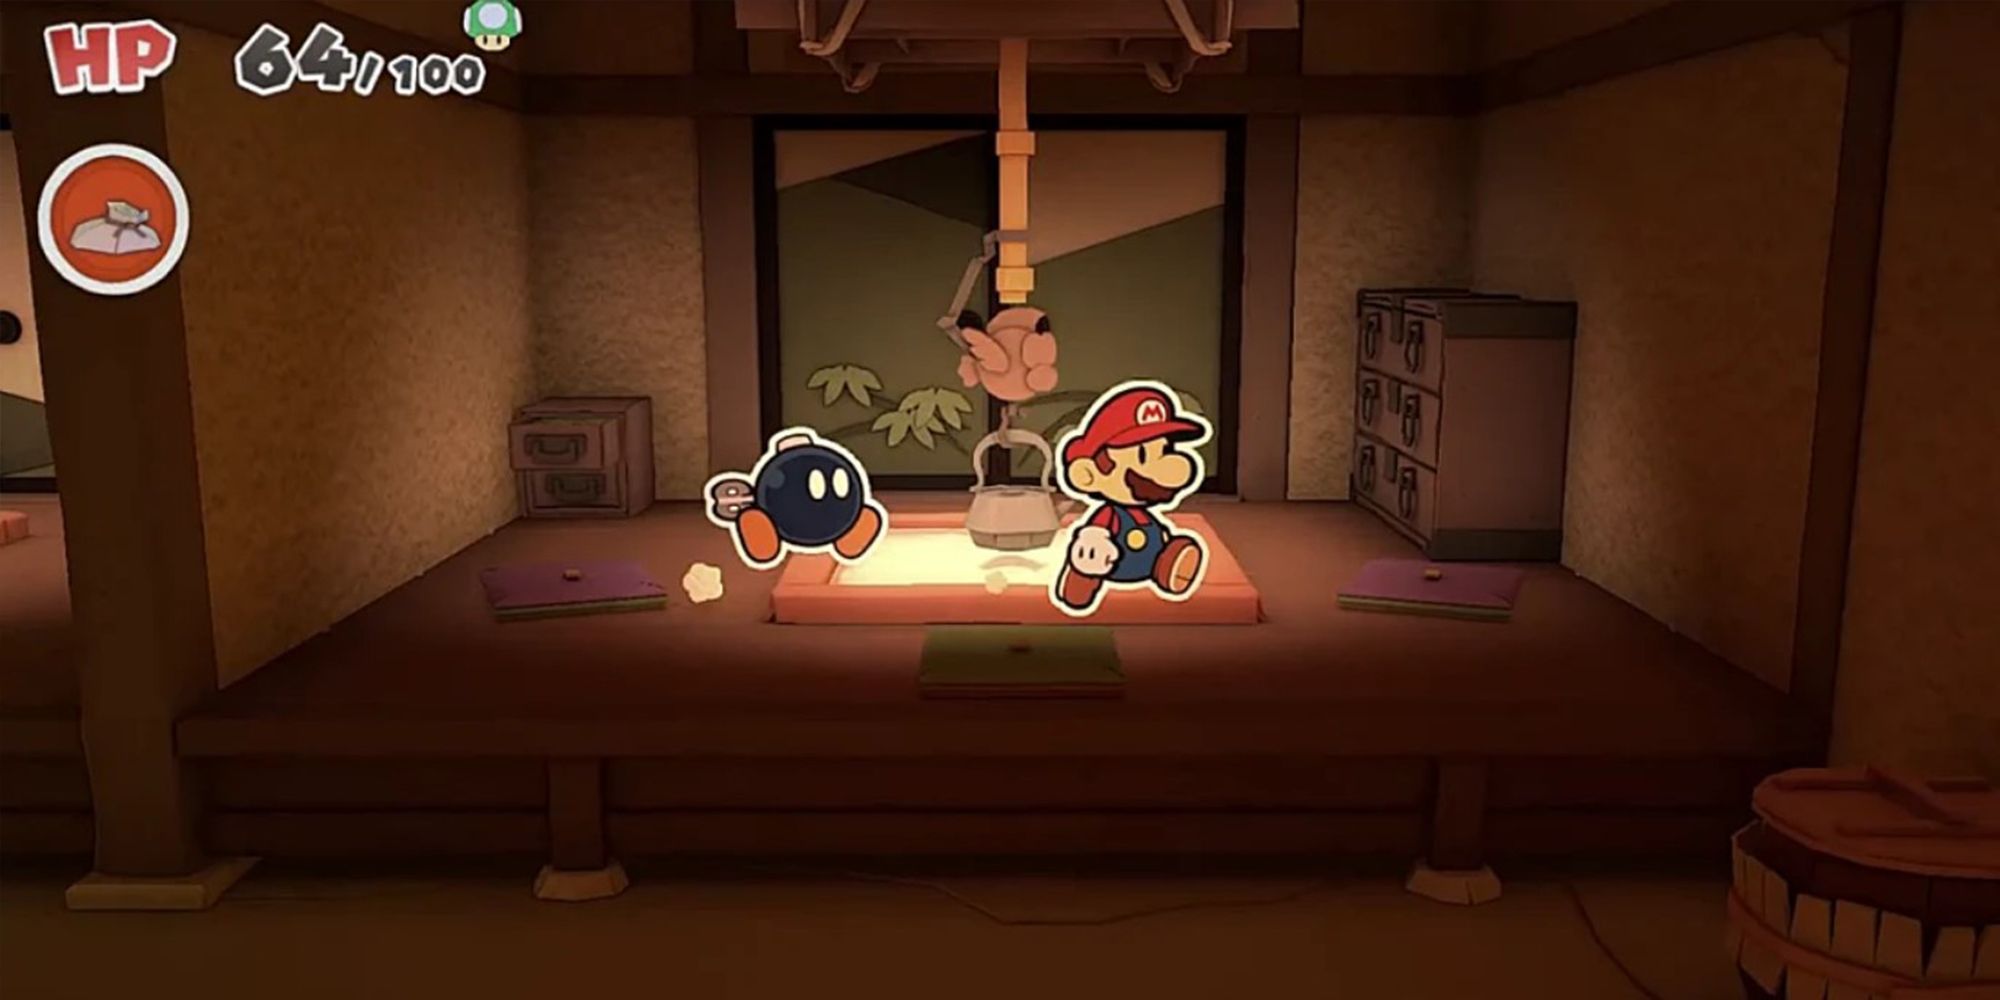 How To Solve The House Of Riddles in Paper Mario